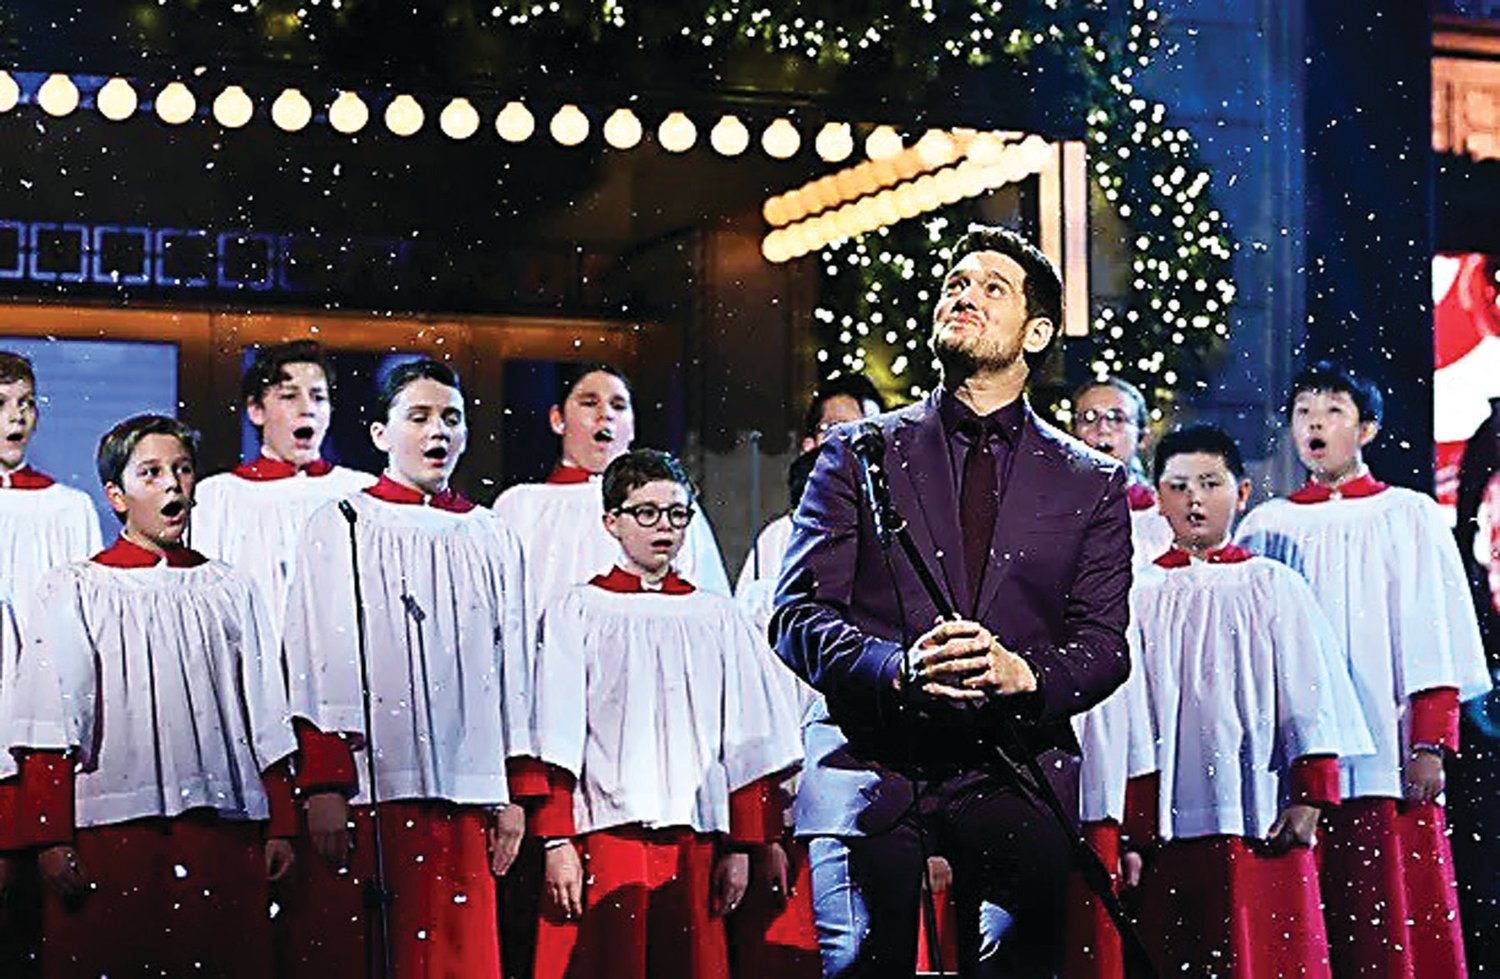 Princeton Boychoir performs with Michael Bublé in his recent NBC special, “Christmas in the City.” It aired on the network and can now be streamed on Peacock and NBC.com.